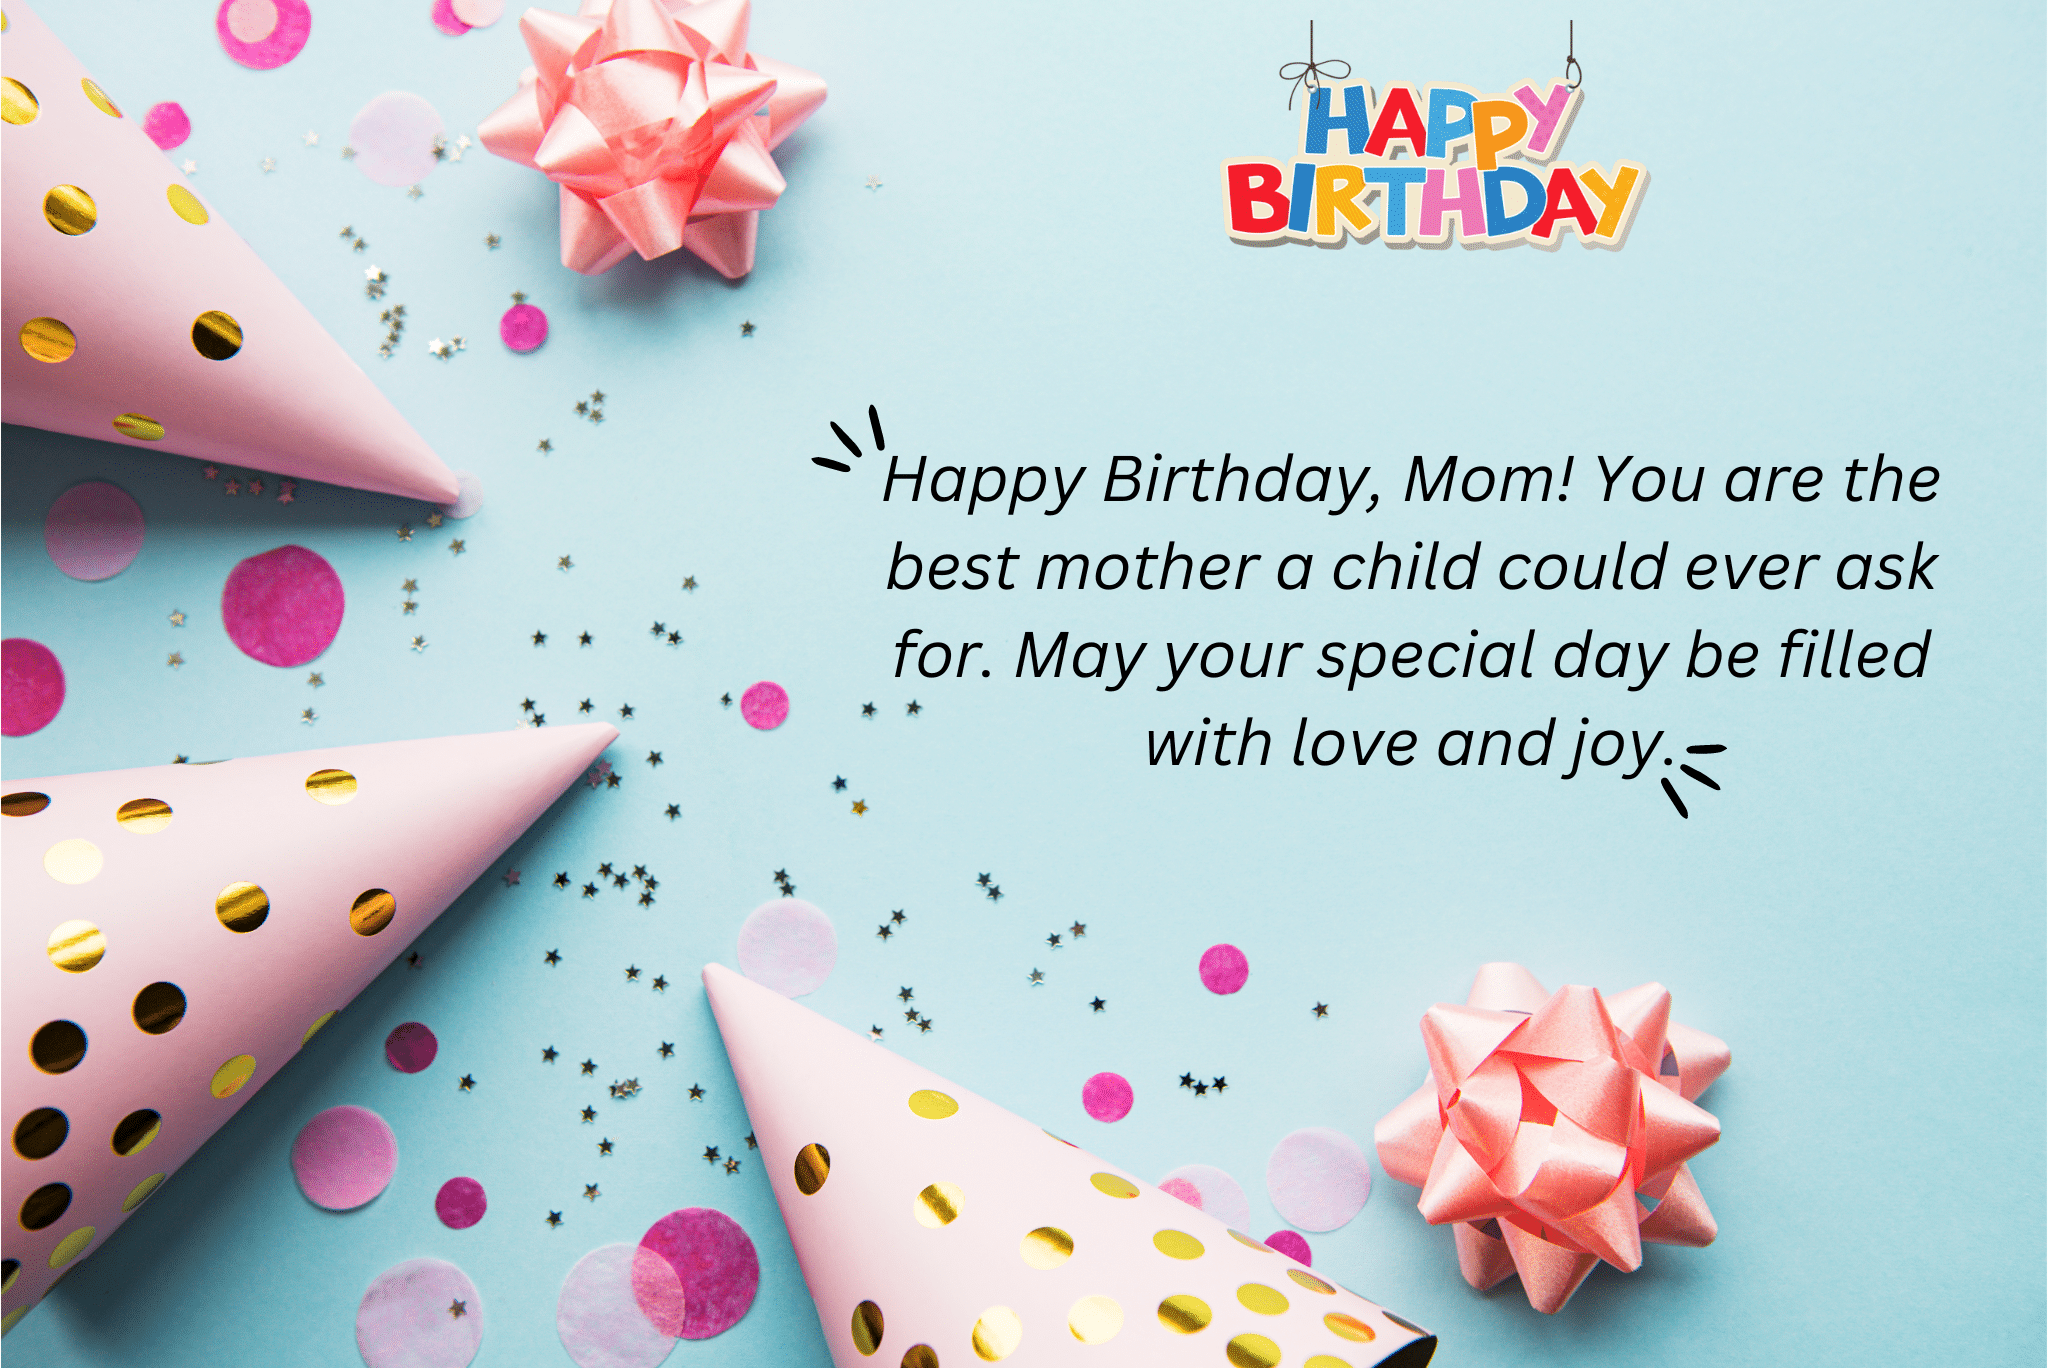 happy birthday, mom! you are the best mother a child could ever ask for. may your special day be filled with love and joy.